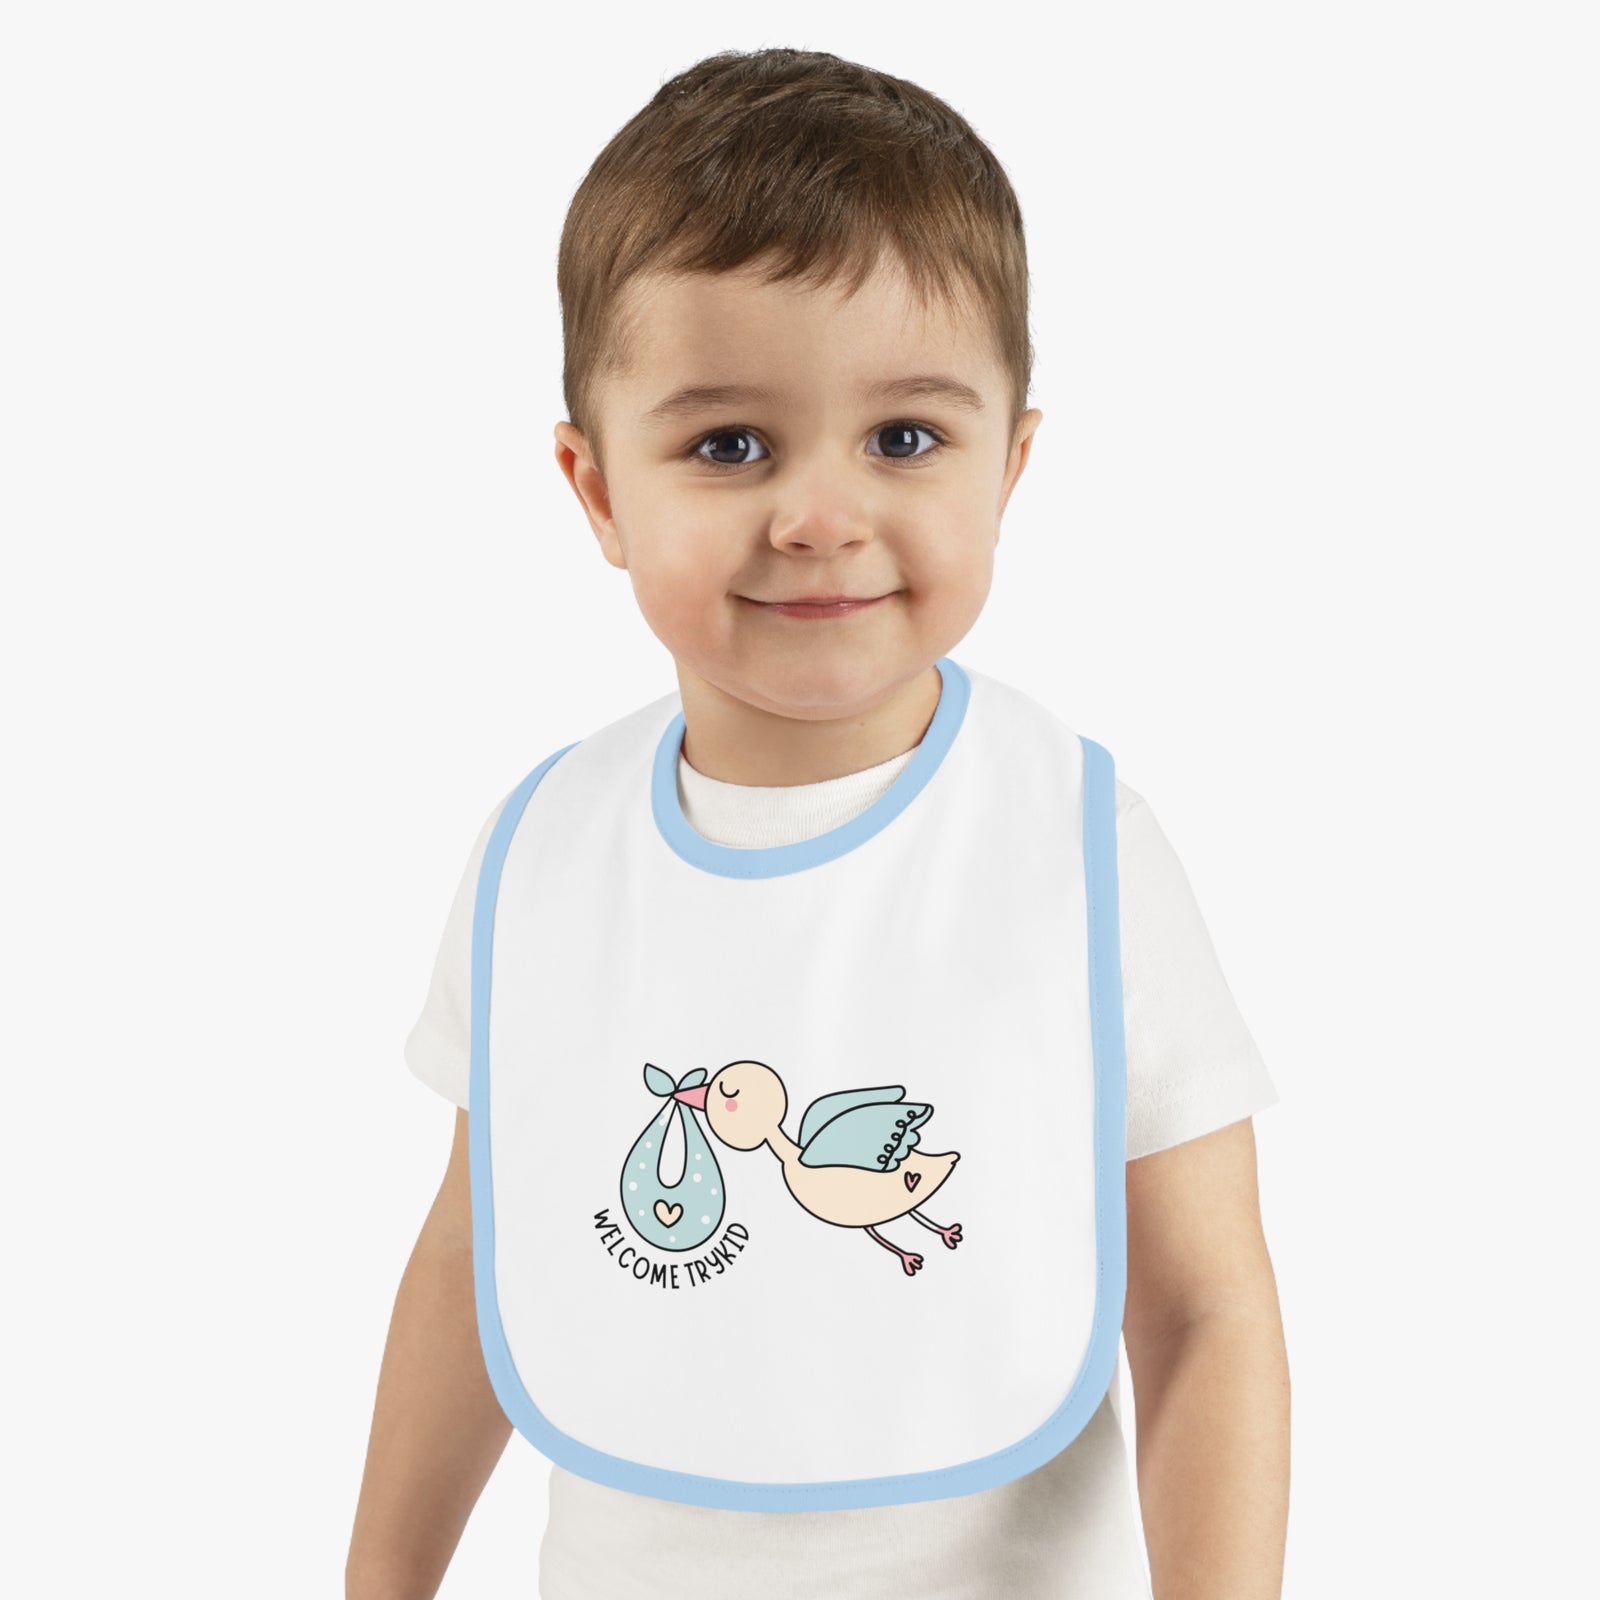 Adorable Baby Contrast Trim Jersey Bib with Exclusive TryKid Logo and Charming Bird Design - A Stylish and Practical Essential for Mess-Free Meals